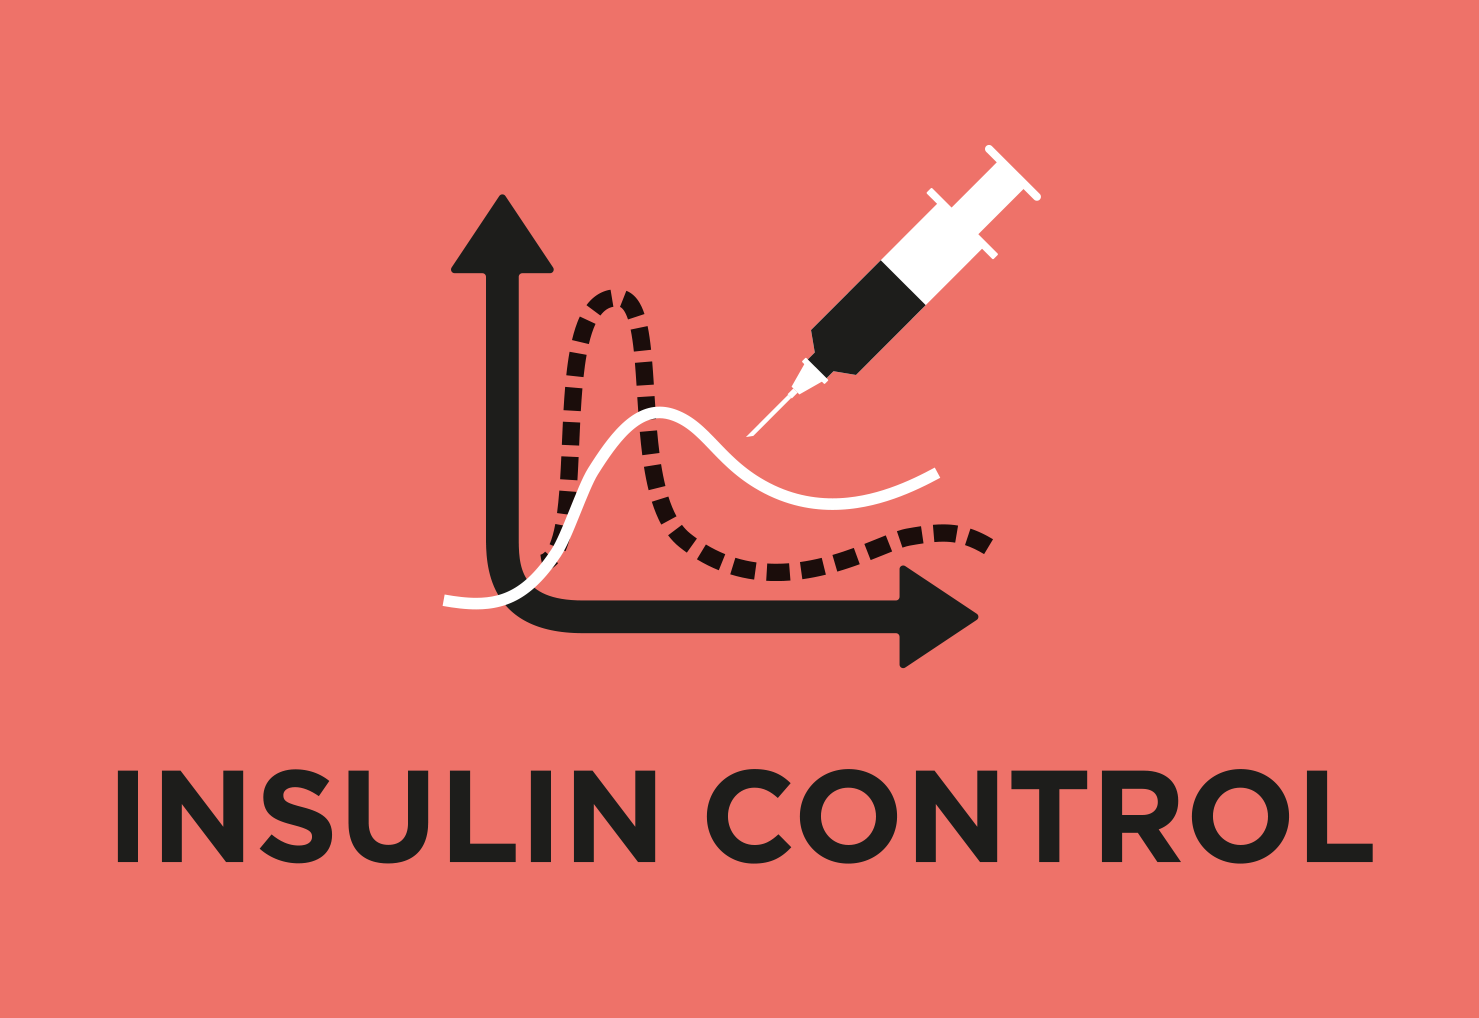 Clinically proven to help reduce insulin requirements